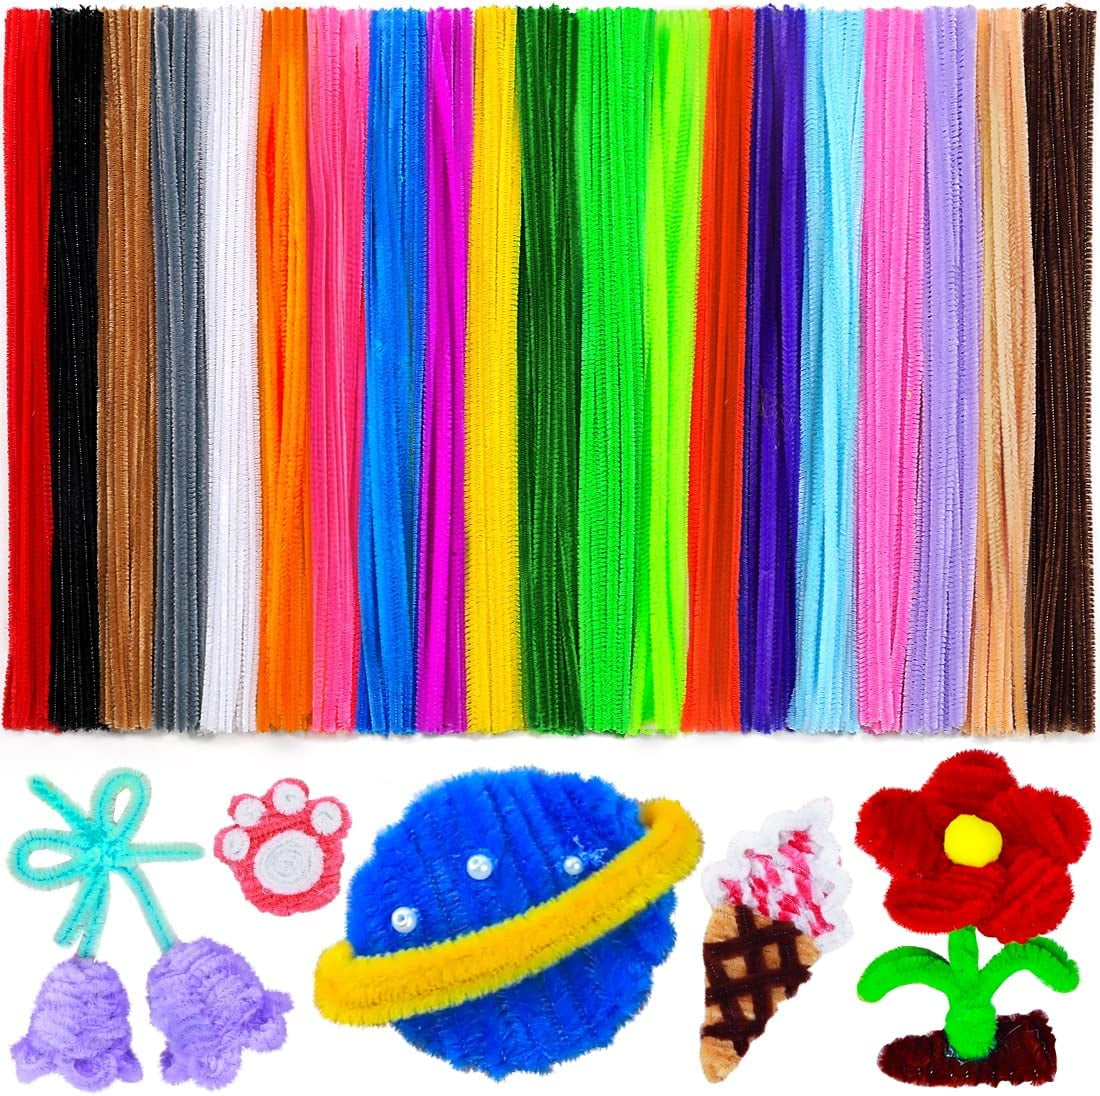 Iooleem 200pcs Black Pipe Cleaners, Chenille Stems, Pipe Cleaners for Crafts, Pipe Cleaner Crafts, Art and Craft Supplies.